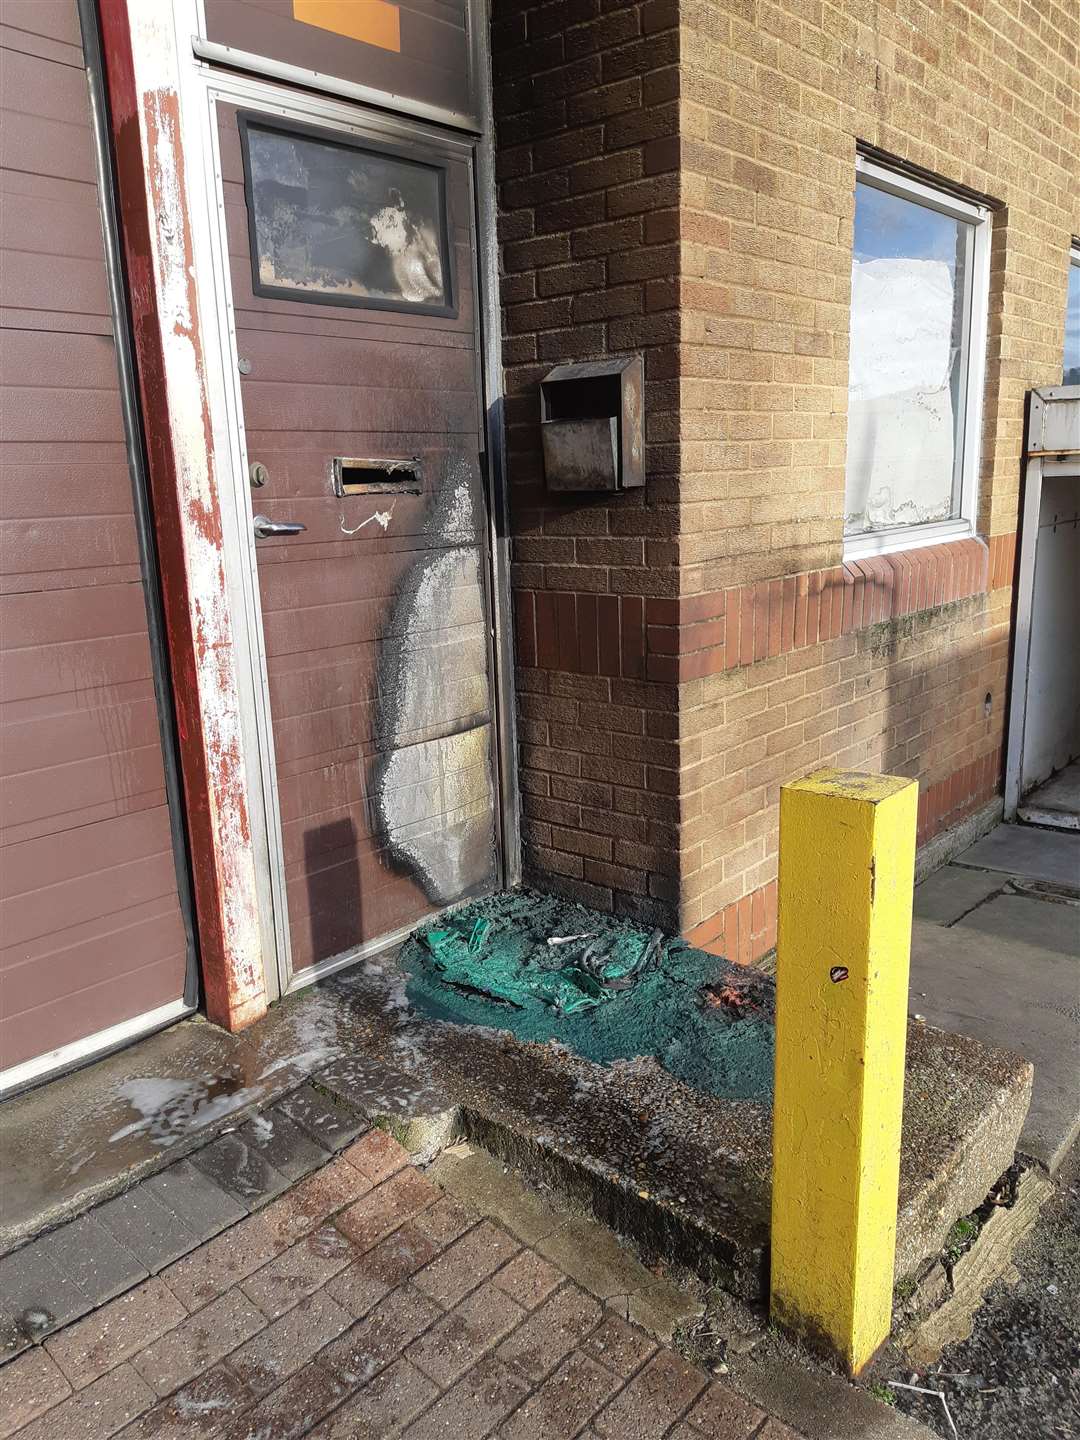 The fire burnt a plastic container and damaged the door, but it could have been a lot worse if the neighbours didn't spot it. (6704090)